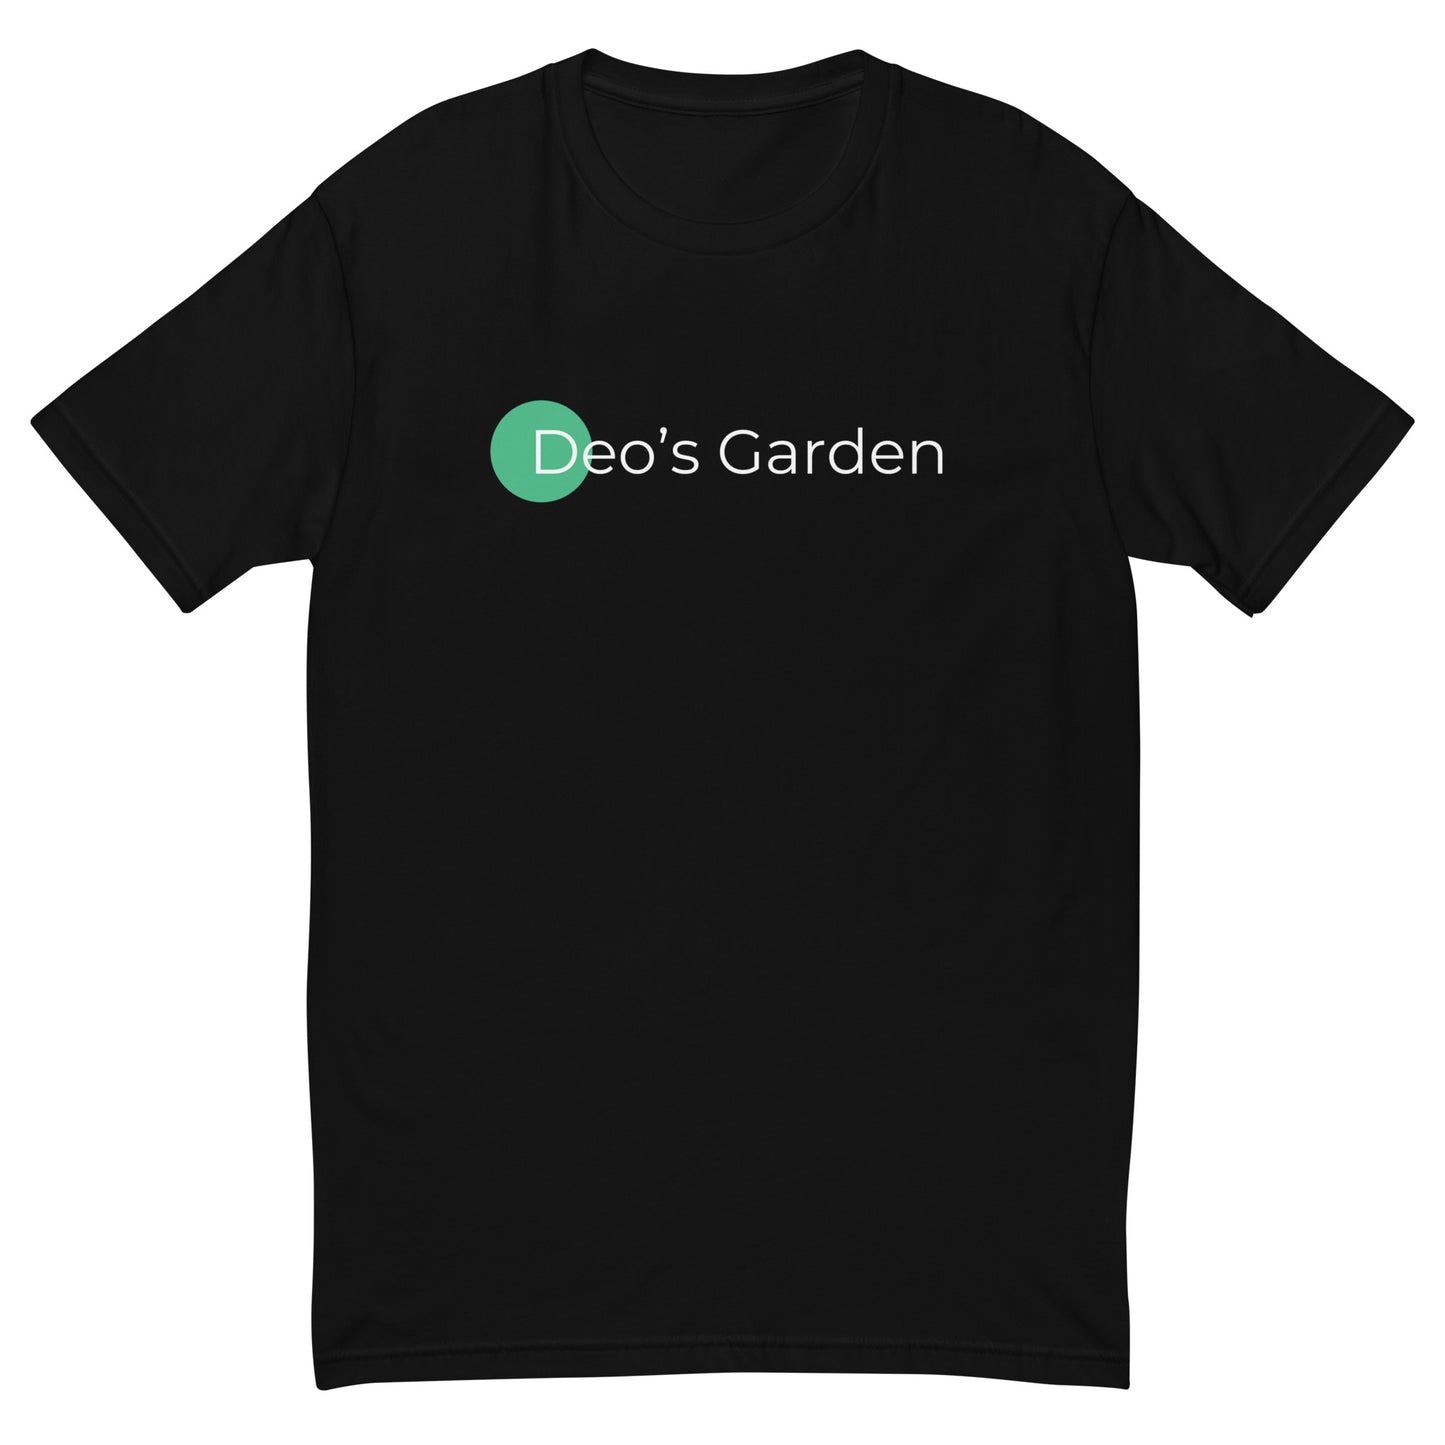 Deo's Garden "Buy Weed From Asians" Short Sleeve T-shirt